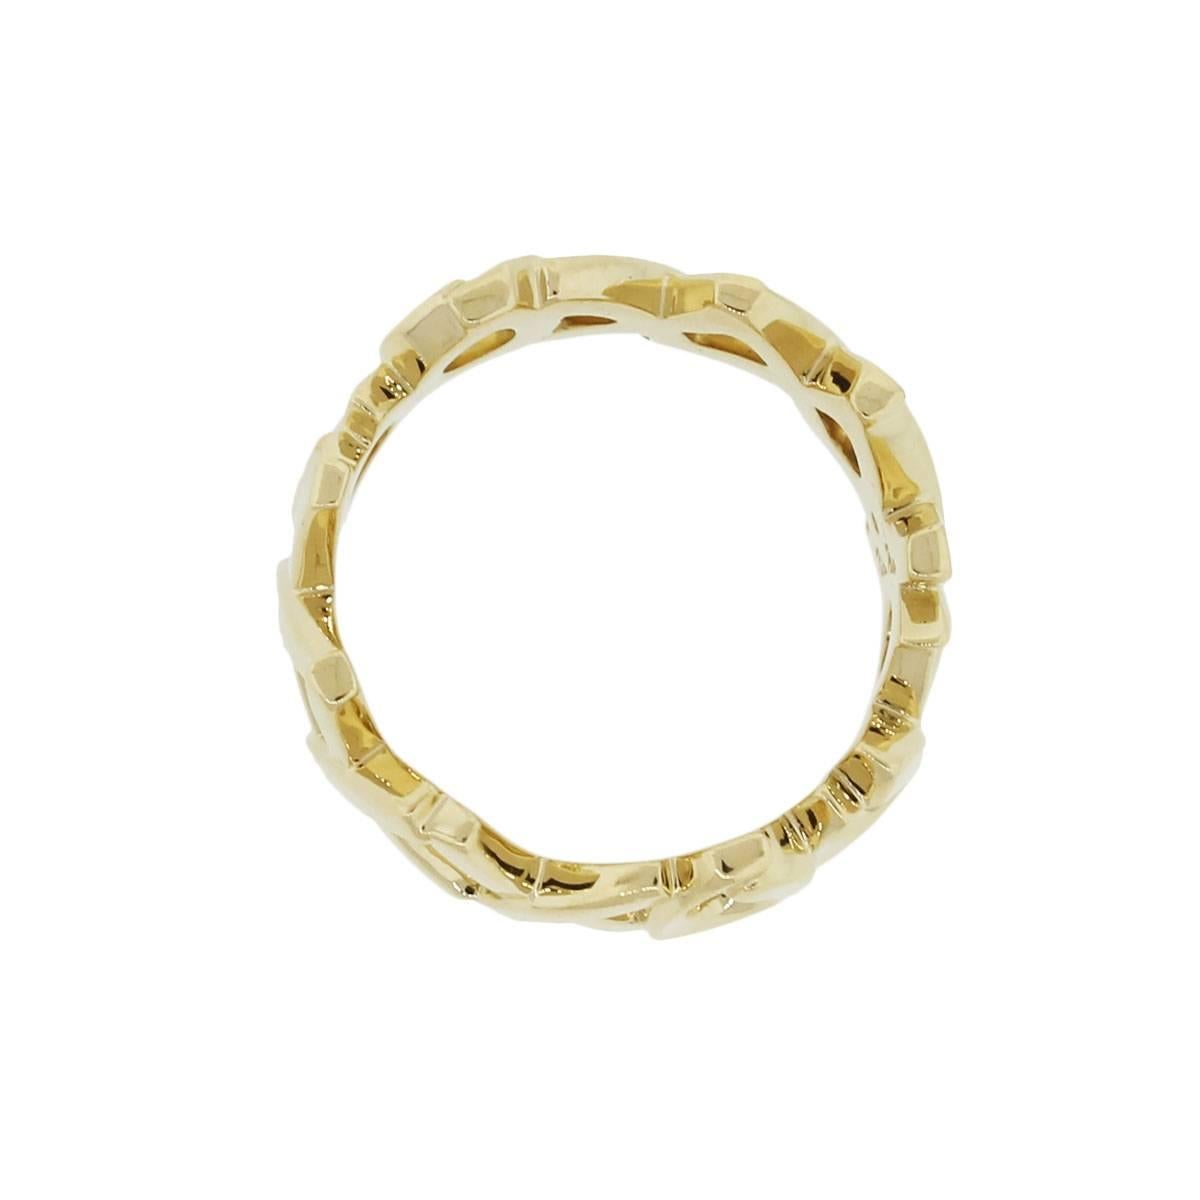 Designer: Tiffany & Co.
Material: 18k yellow gold
Size: 9.25
Total Weight: 10.8g (6.9dwt)
Measurements: 0.91″ x 0.36″ x 0.91″
Additional Details: This item comes with a presentation box!
SKU: R4547